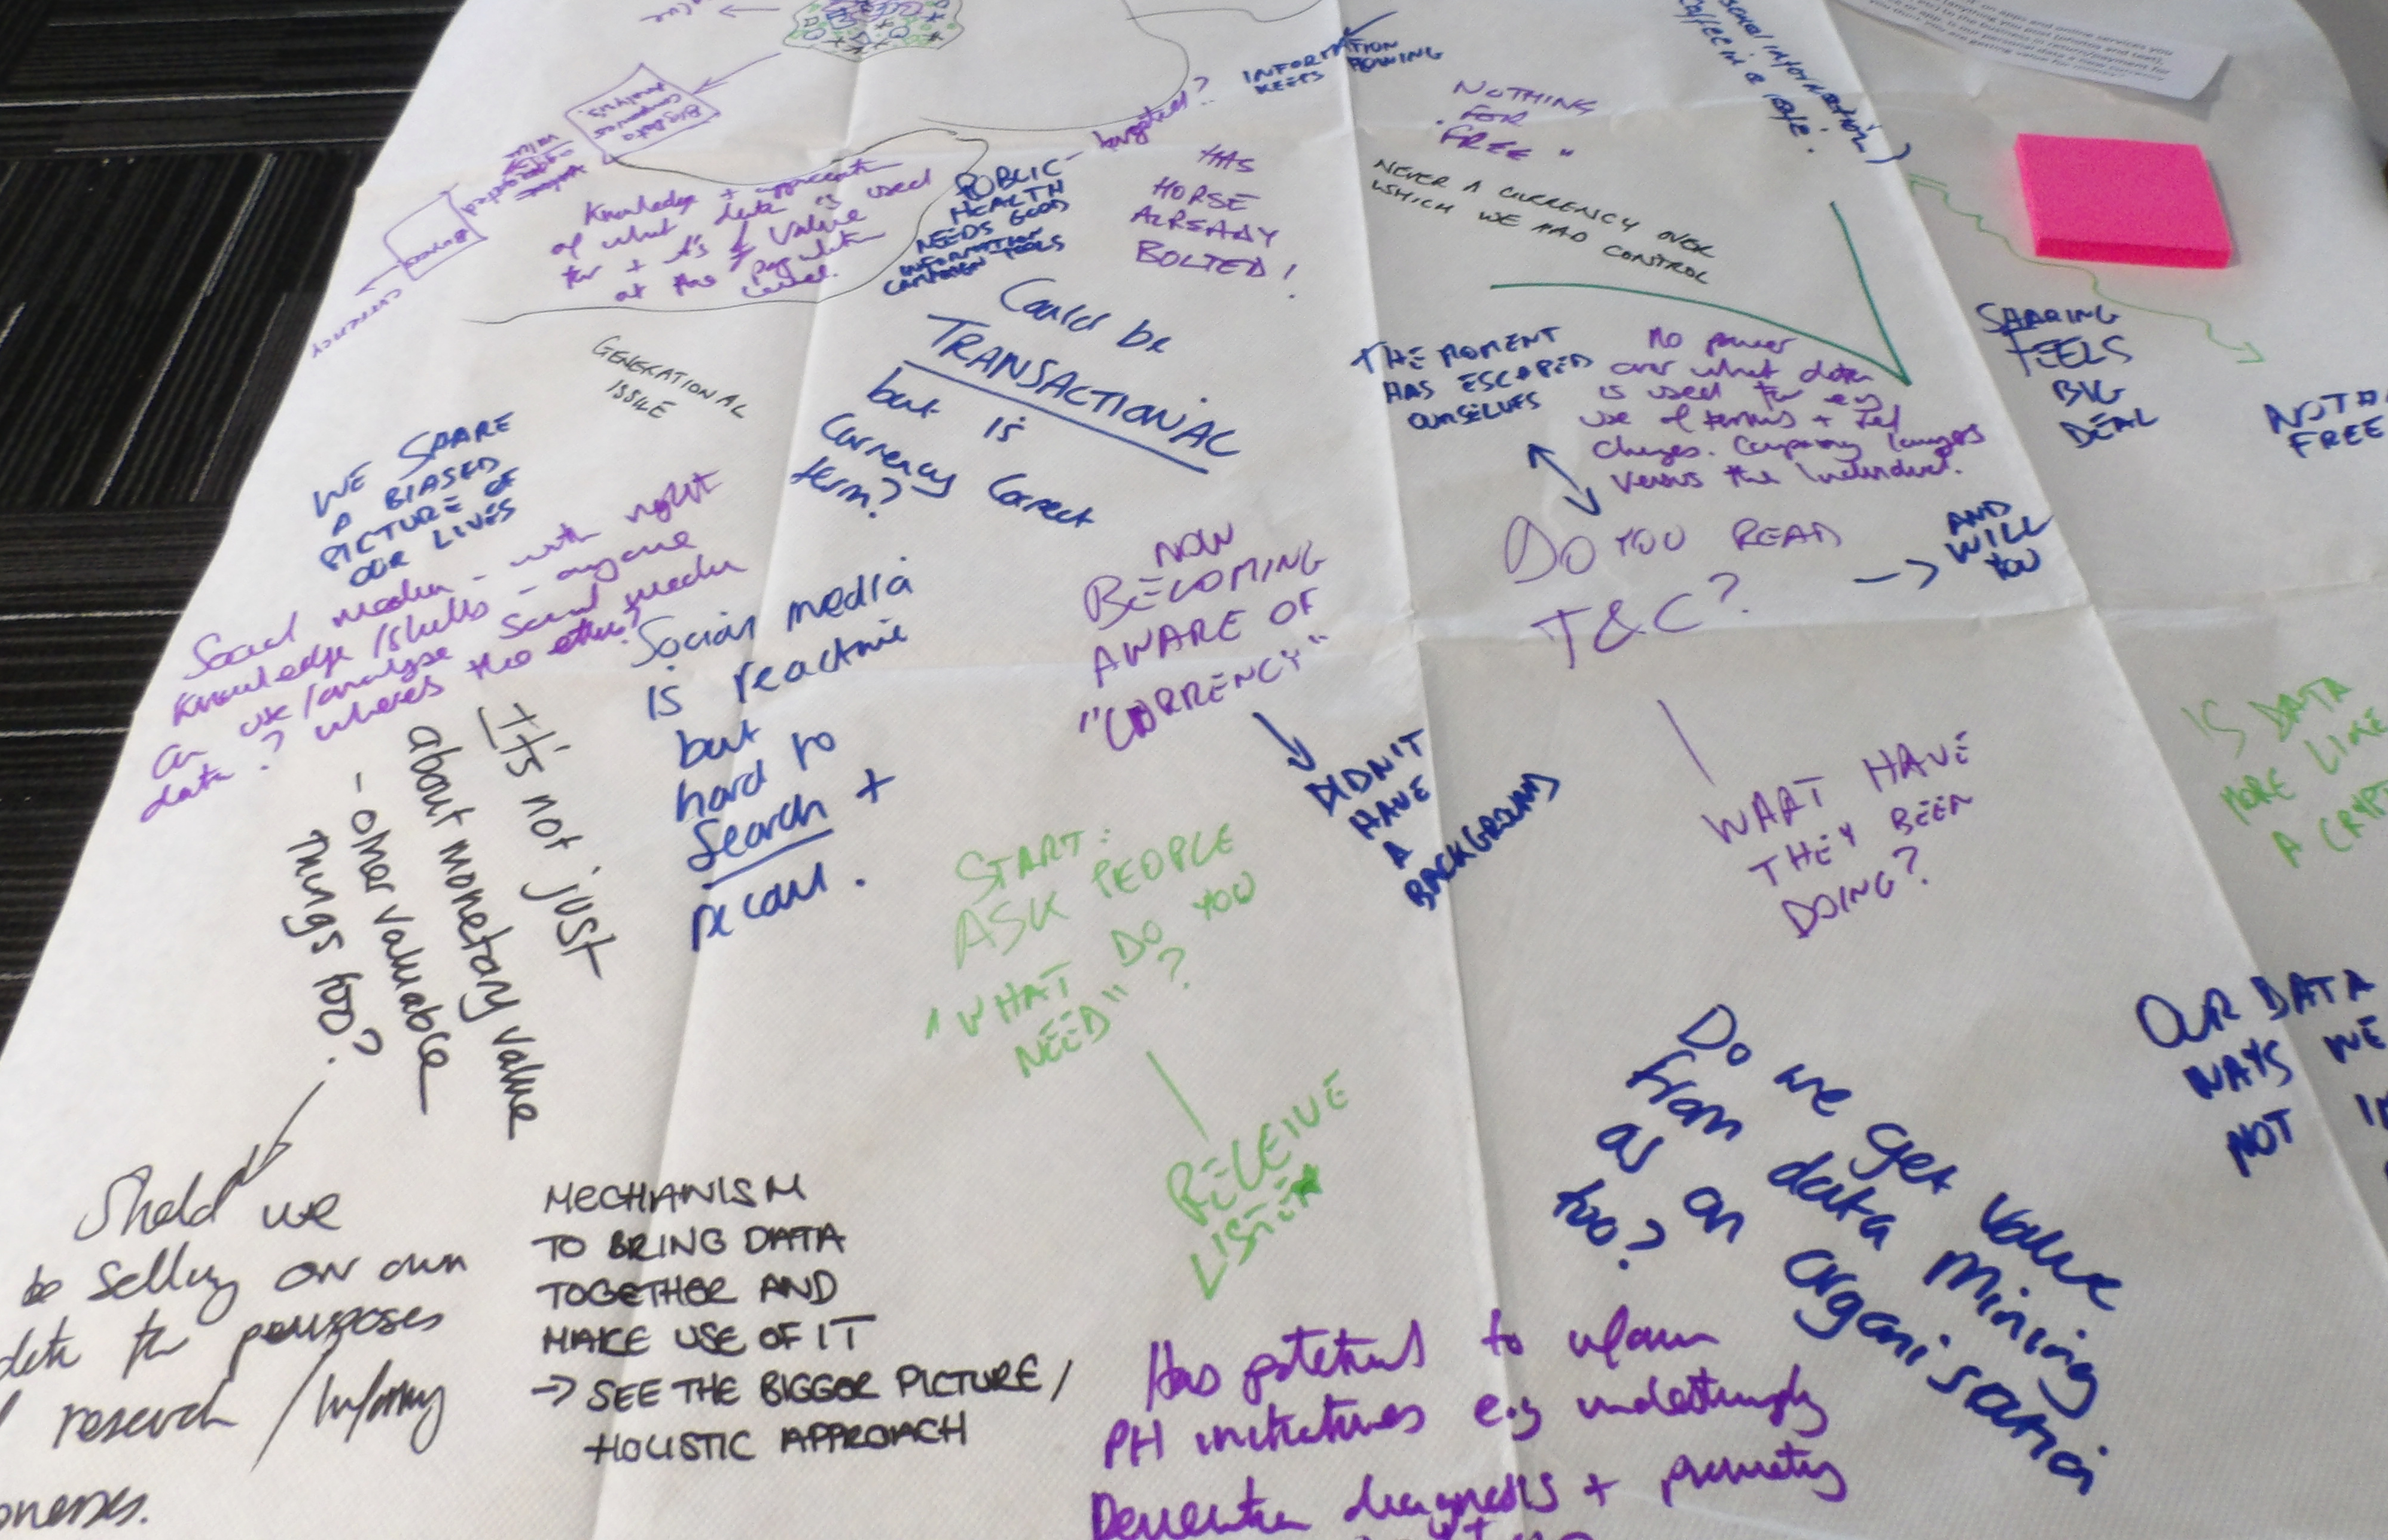 Notes scribbled on a tablecloth in different colours and hands